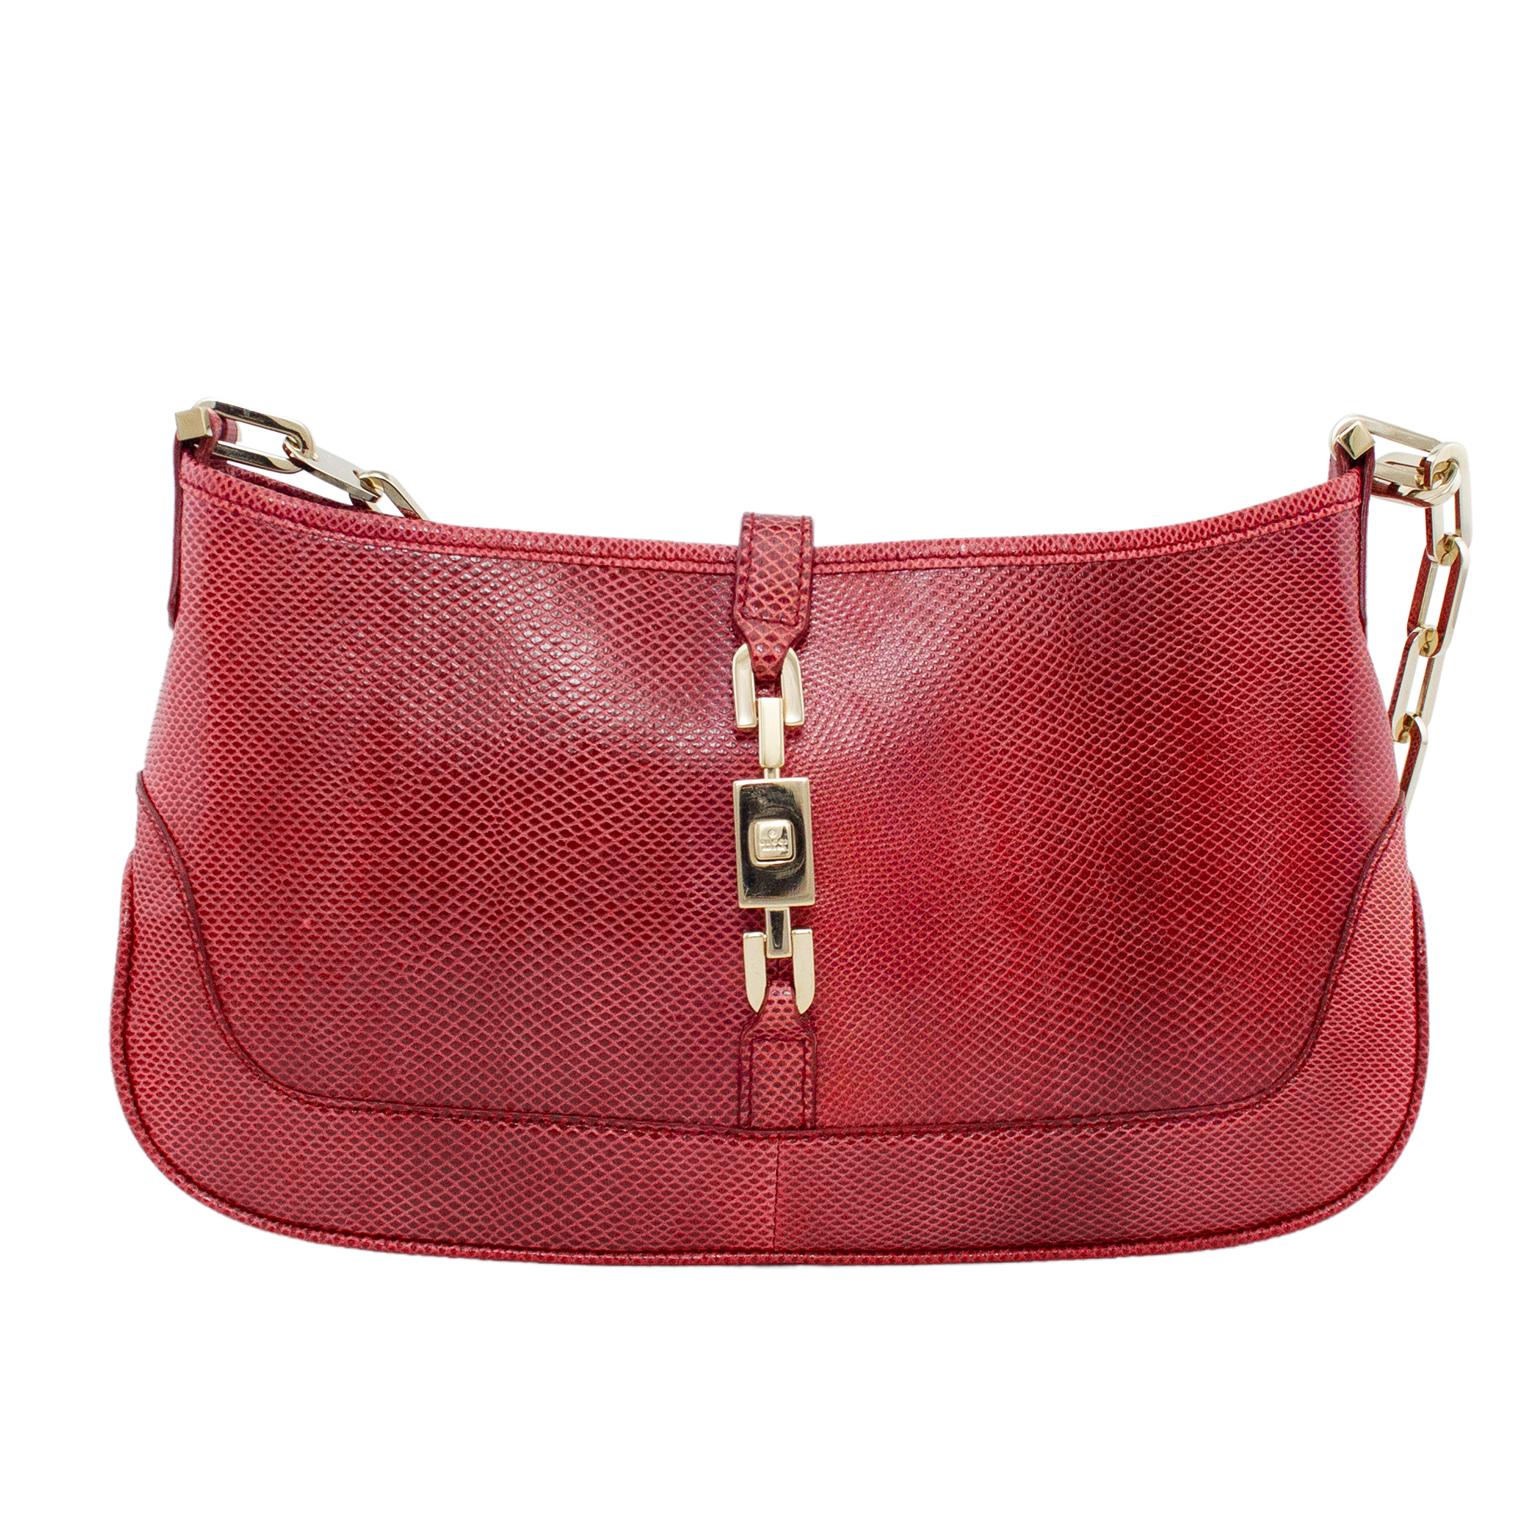 From Tom Fords era at Gucci, this is the mini size Jackie O Gucci bag. Gradient cranberry red reptile effect with silver metal chain link handle. Silver tone metal slide lock closures with a Gucci logo engraved button that you press to release.